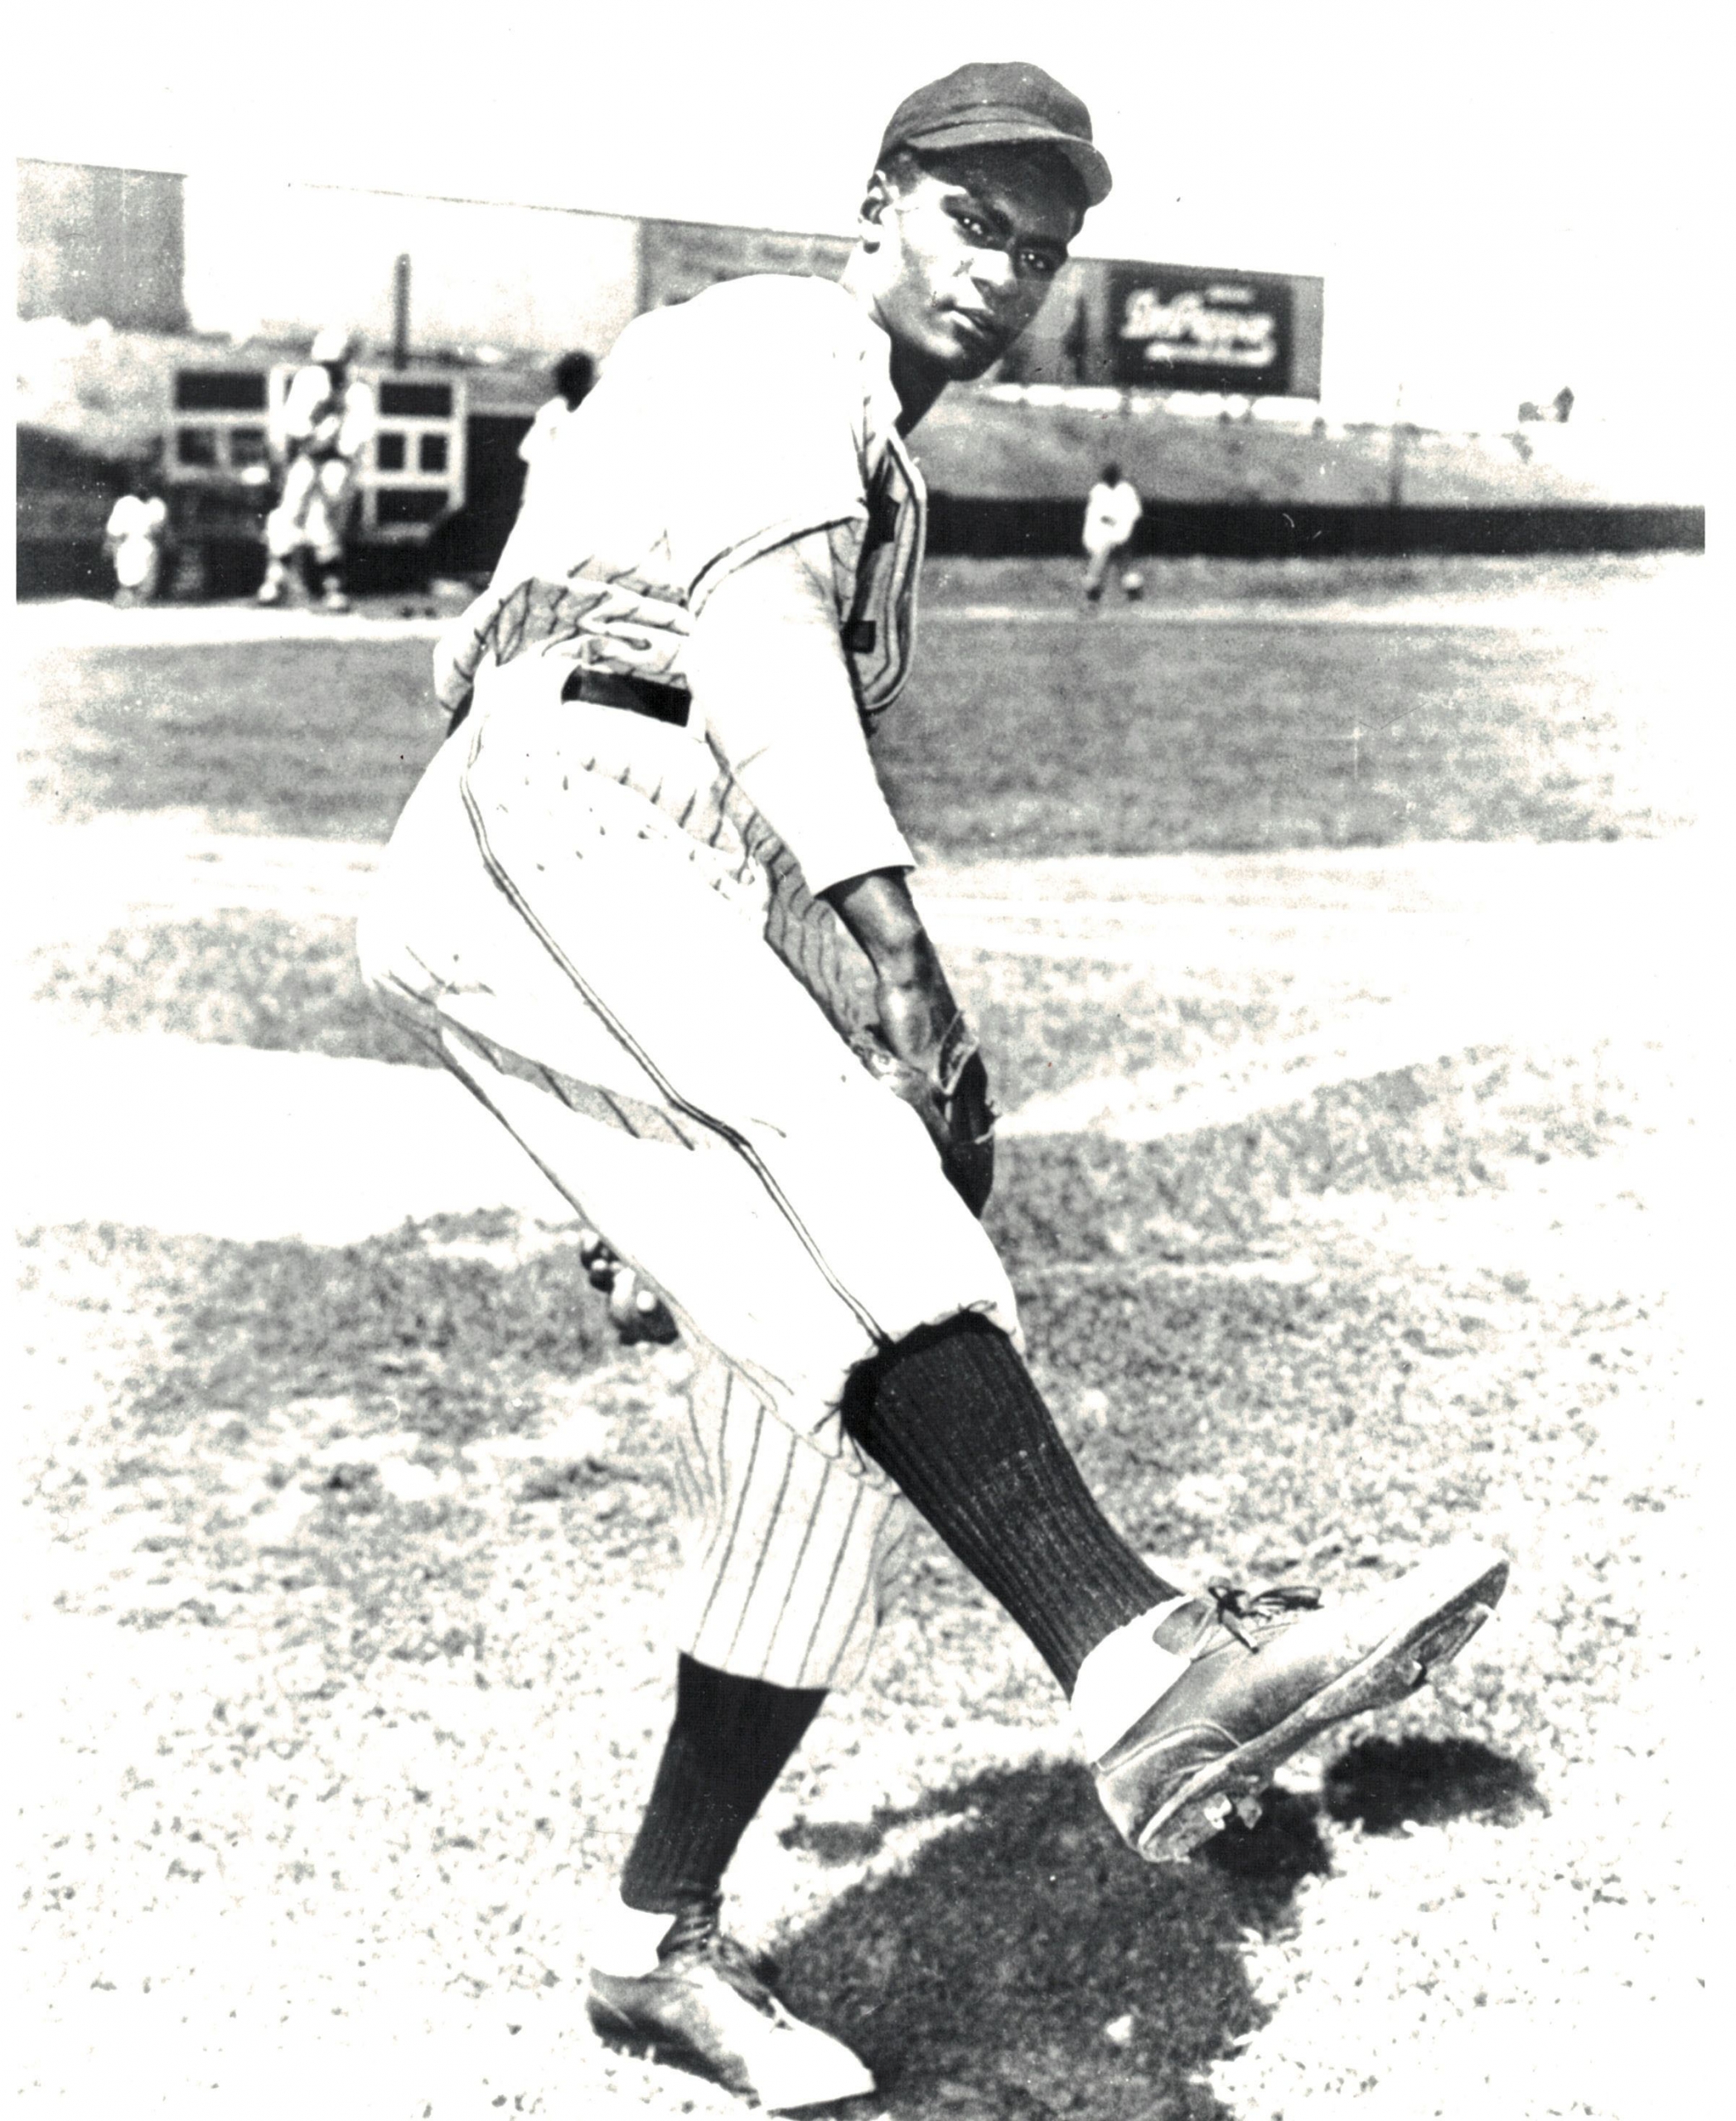 Satchel Paige at 59 Years Old Playing An Exhibition Game at Comiskey